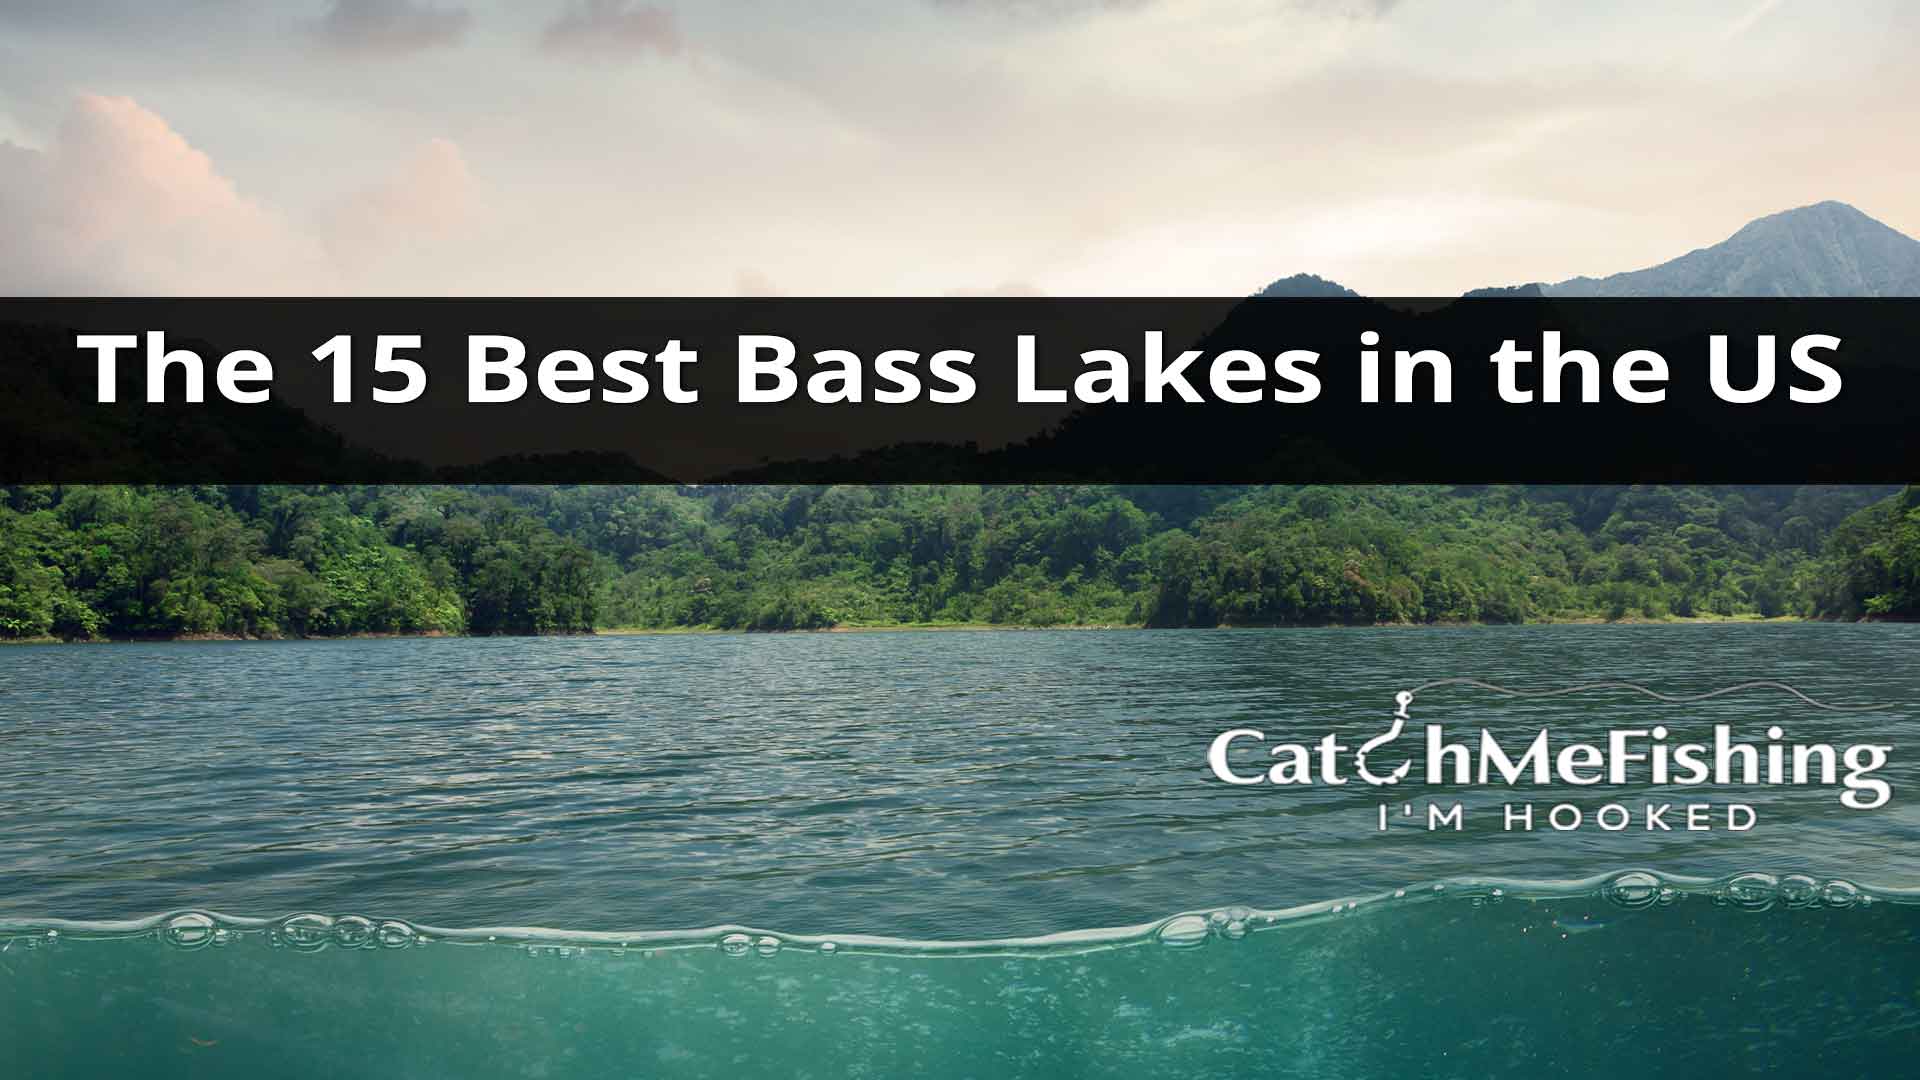 The 15 Best Bass Lakes in the US Places to Fish 2022 CatchMeFishing